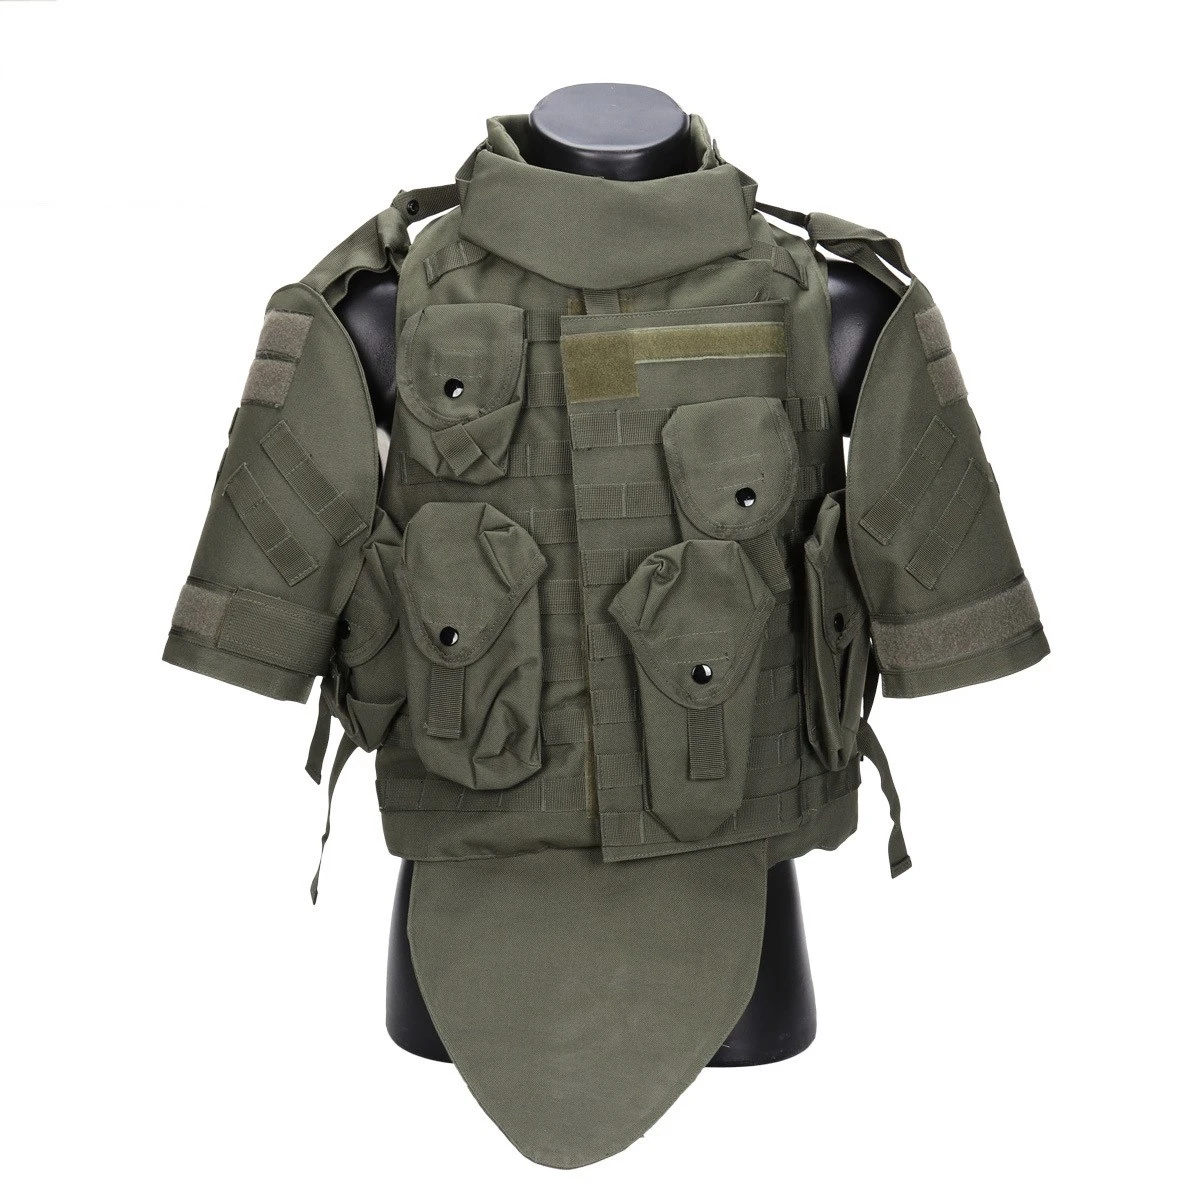 

OTV Expansion Tactical Vest Combat Military Field Training Protective Clothes Molle Bags Nylon Camouflage Men Outdoor Waistcoat